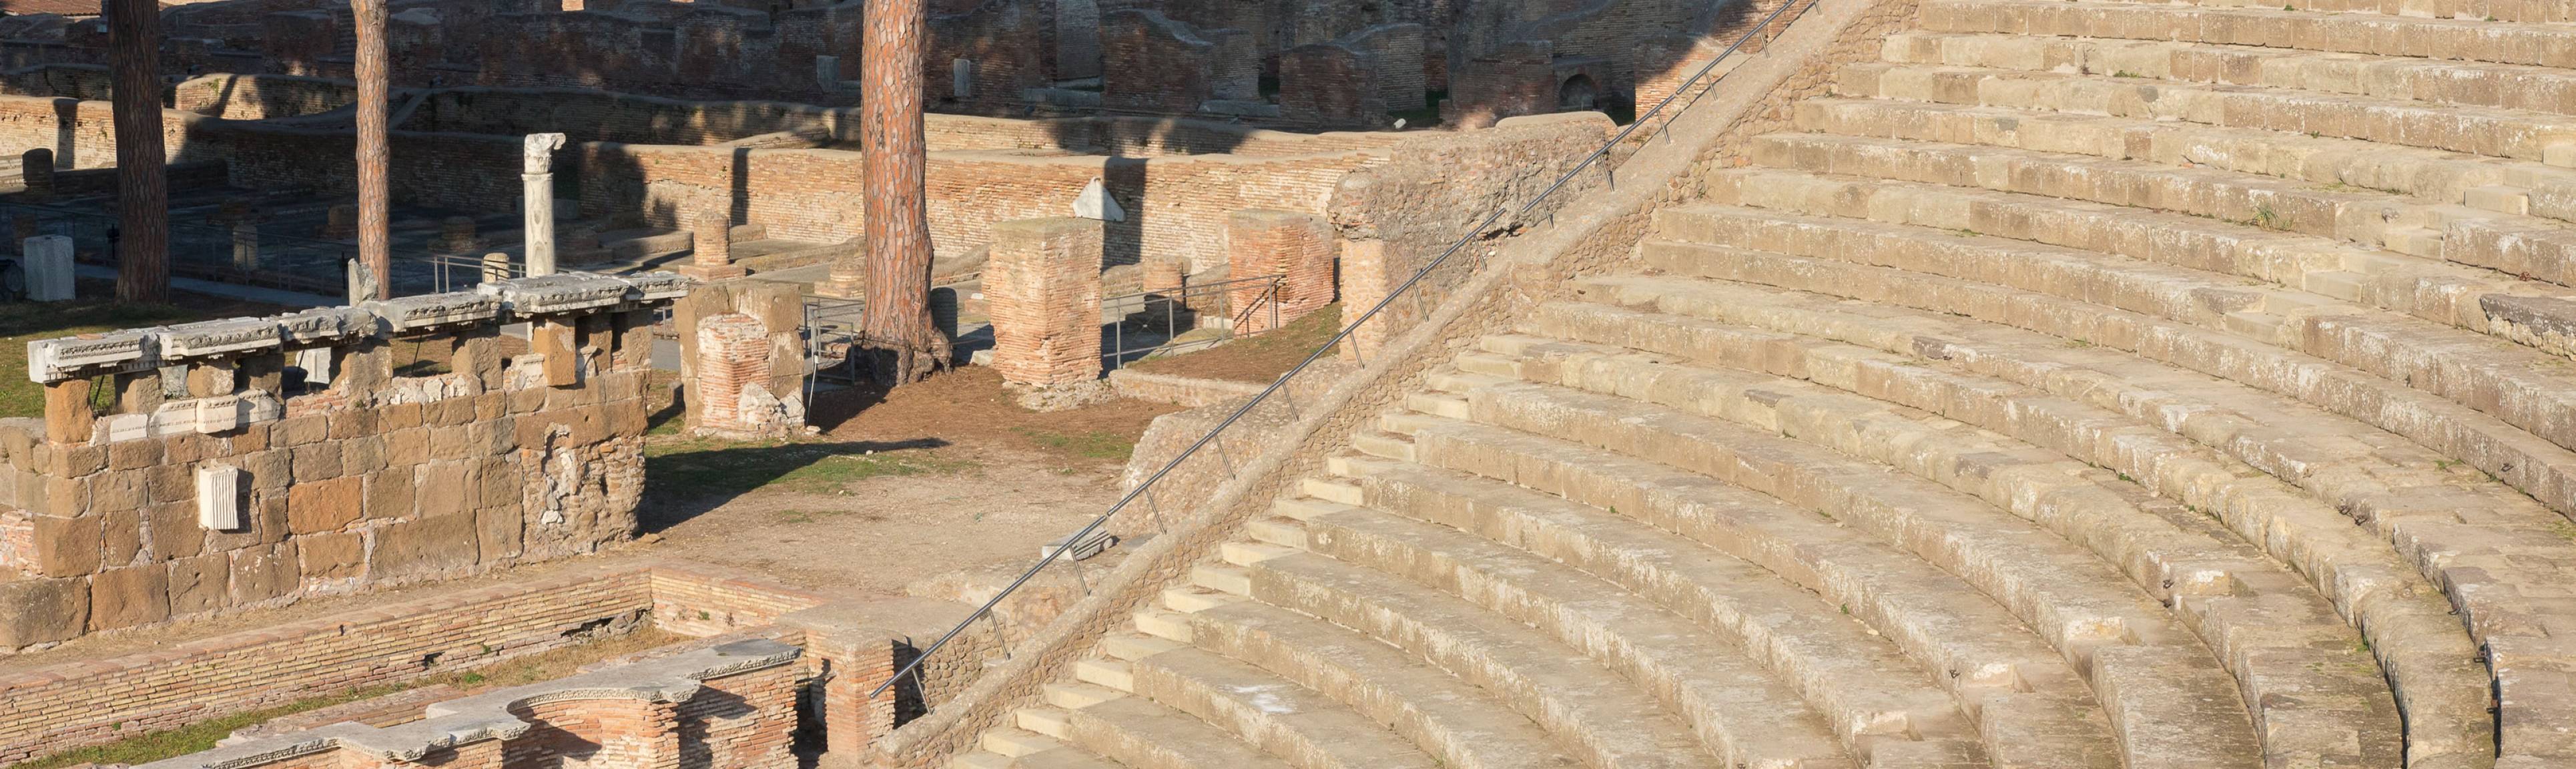 Rows of amphitheater seating at Agrippa's Theatre at Ostia, near Rome